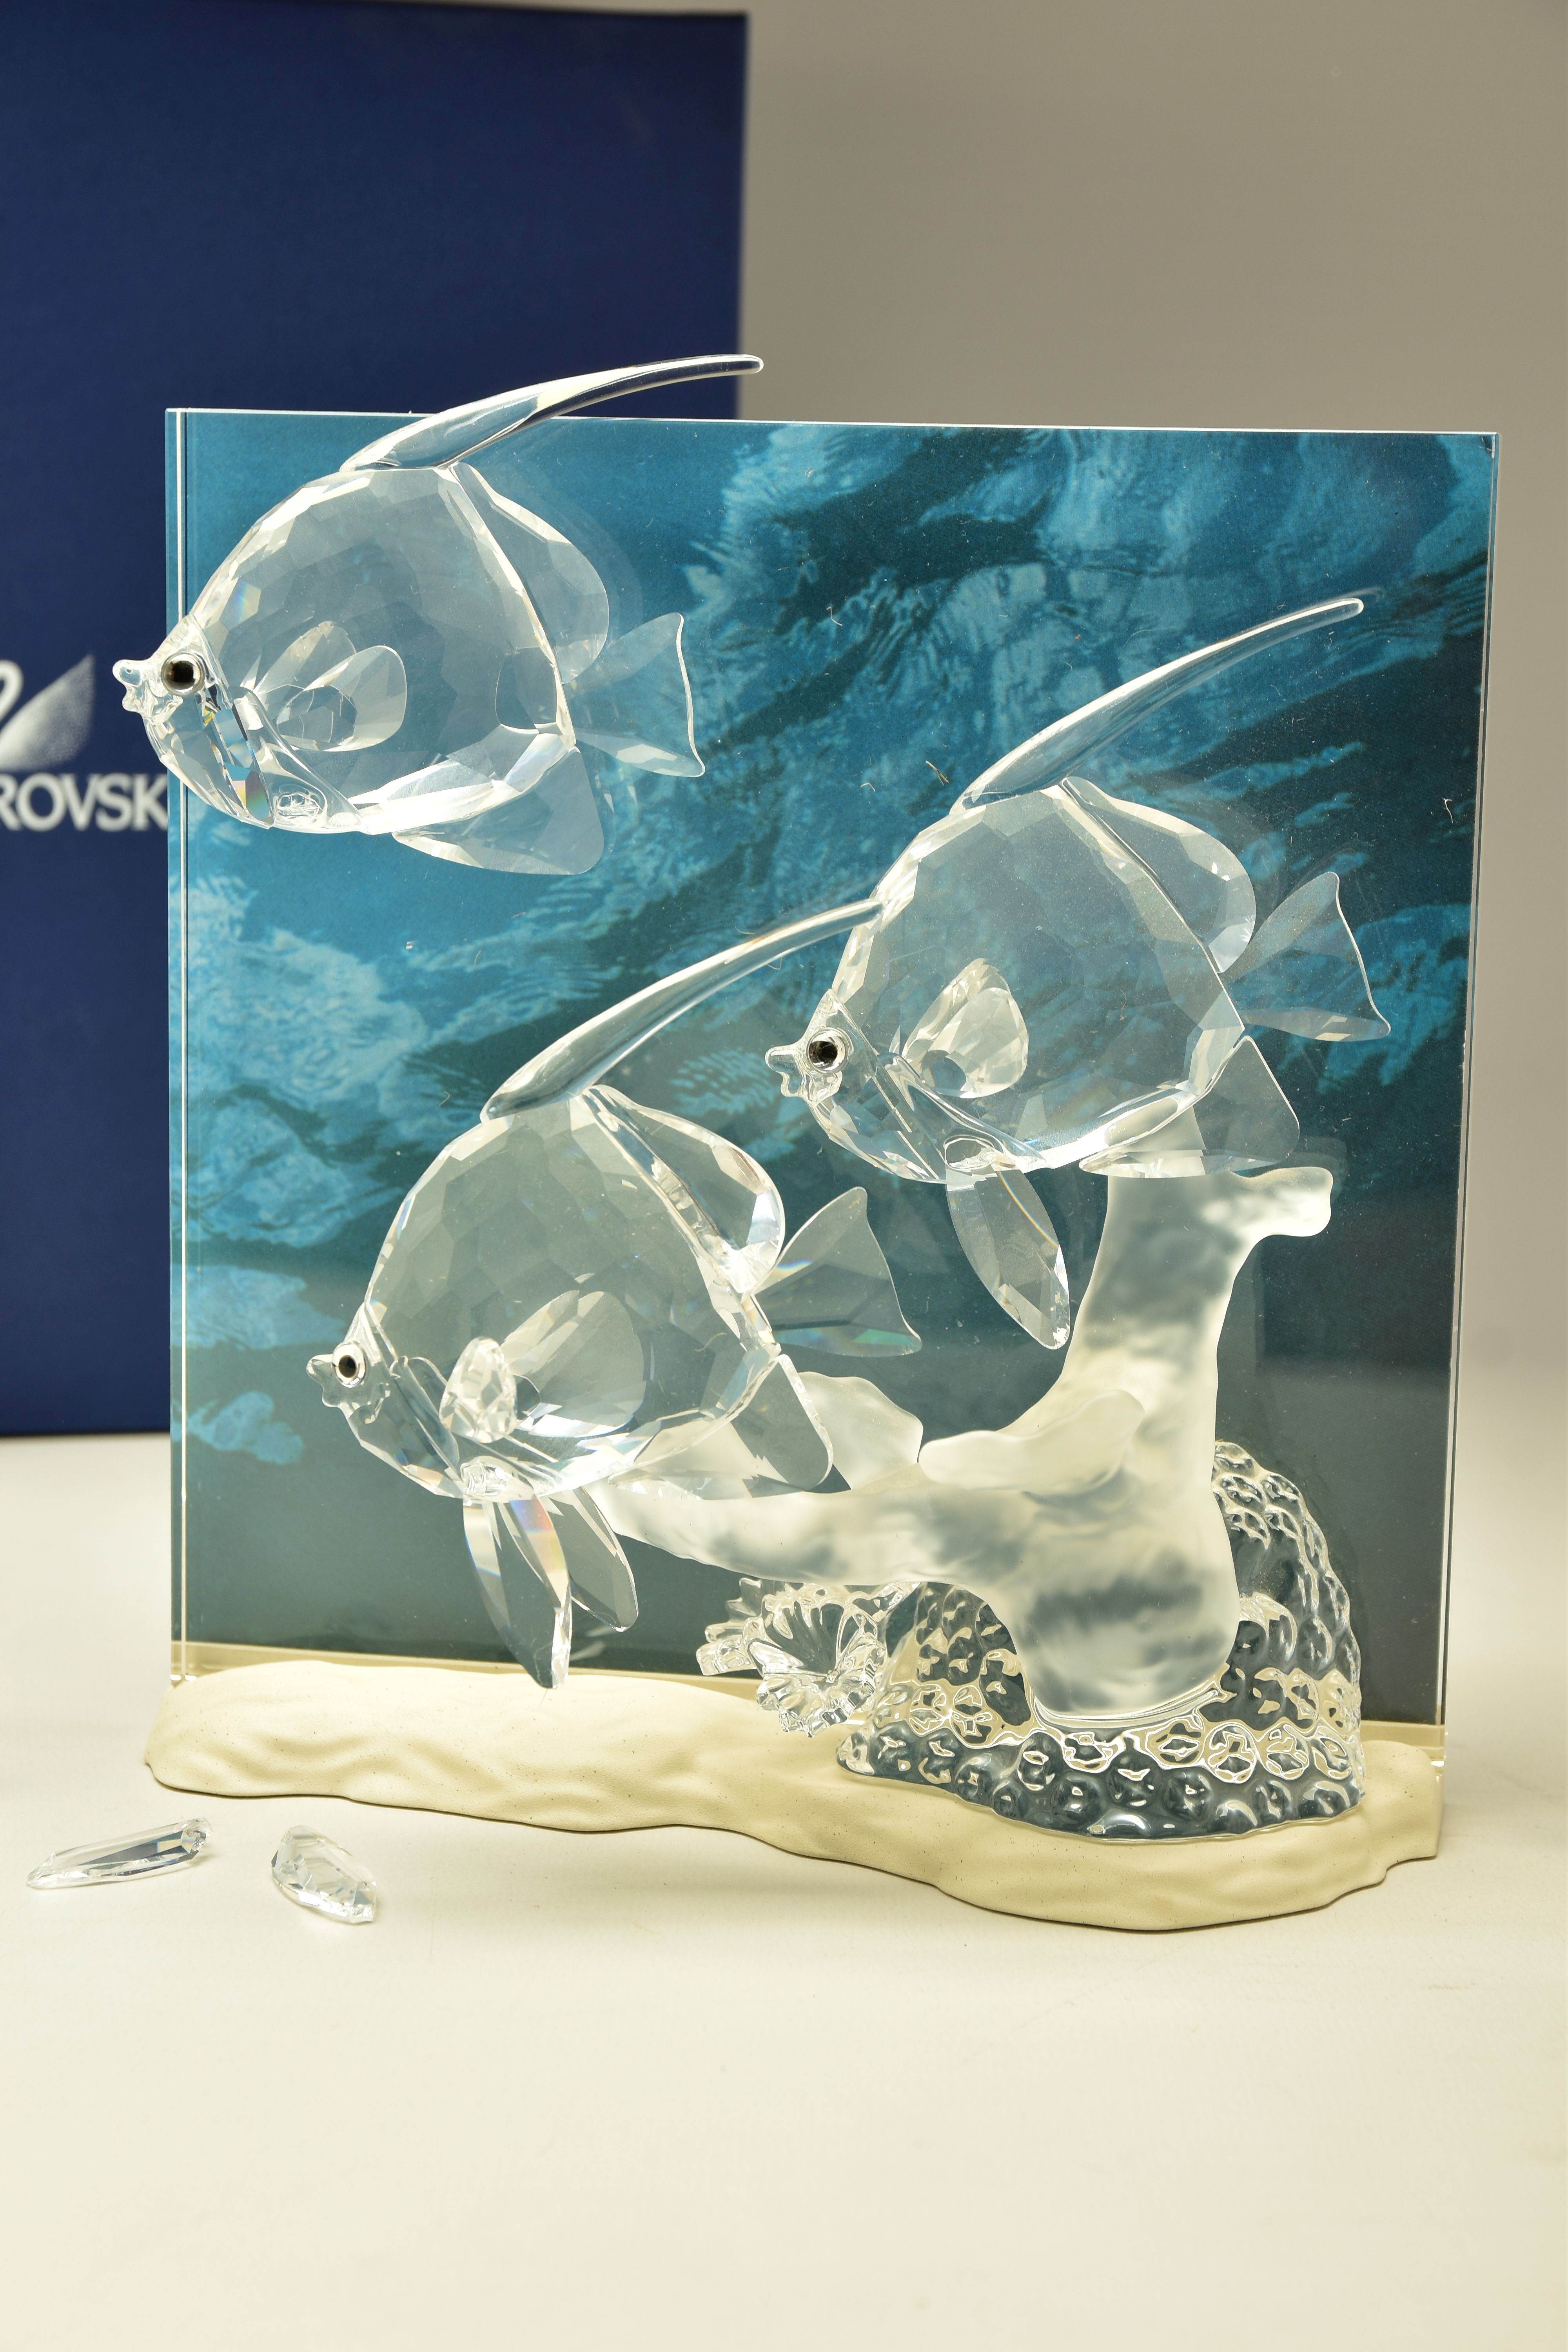 A BOXED SWAROVSKI CRYSTAL SOCIETY DIORAMA, THIRD PIECE OF THE TRILOGY WONDERS OF THE SEA - COMMUNITY - Image 2 of 6